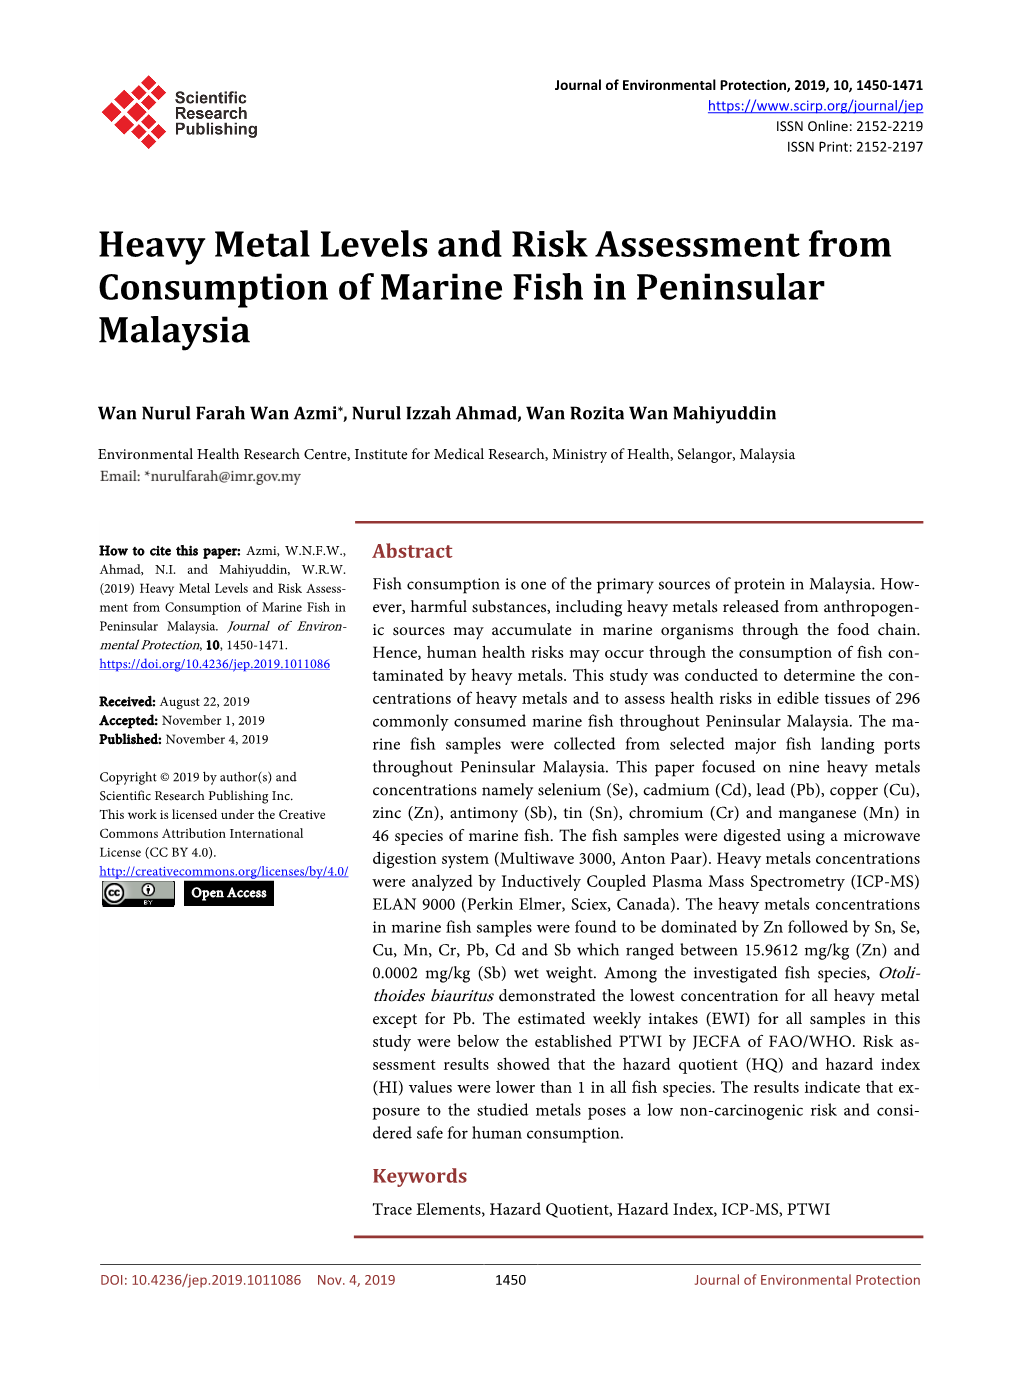 Heavy Metal Levels and Risk Assessment from Consumption of Marine Fish in Peninsular Malaysia